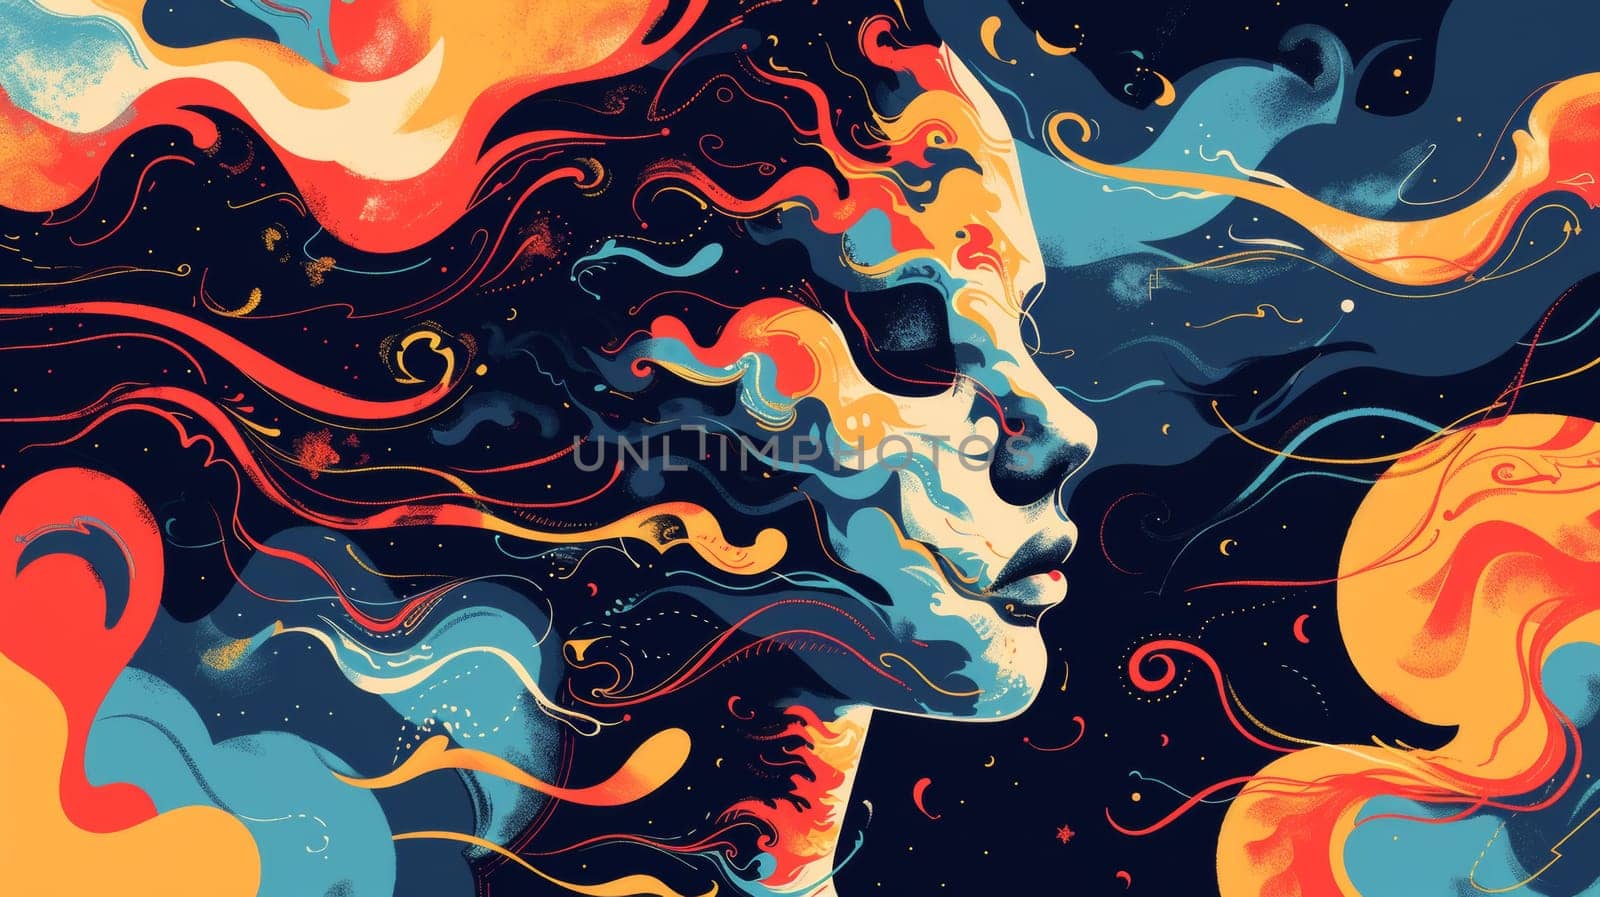 A painting of a woman's face with swirls and colors